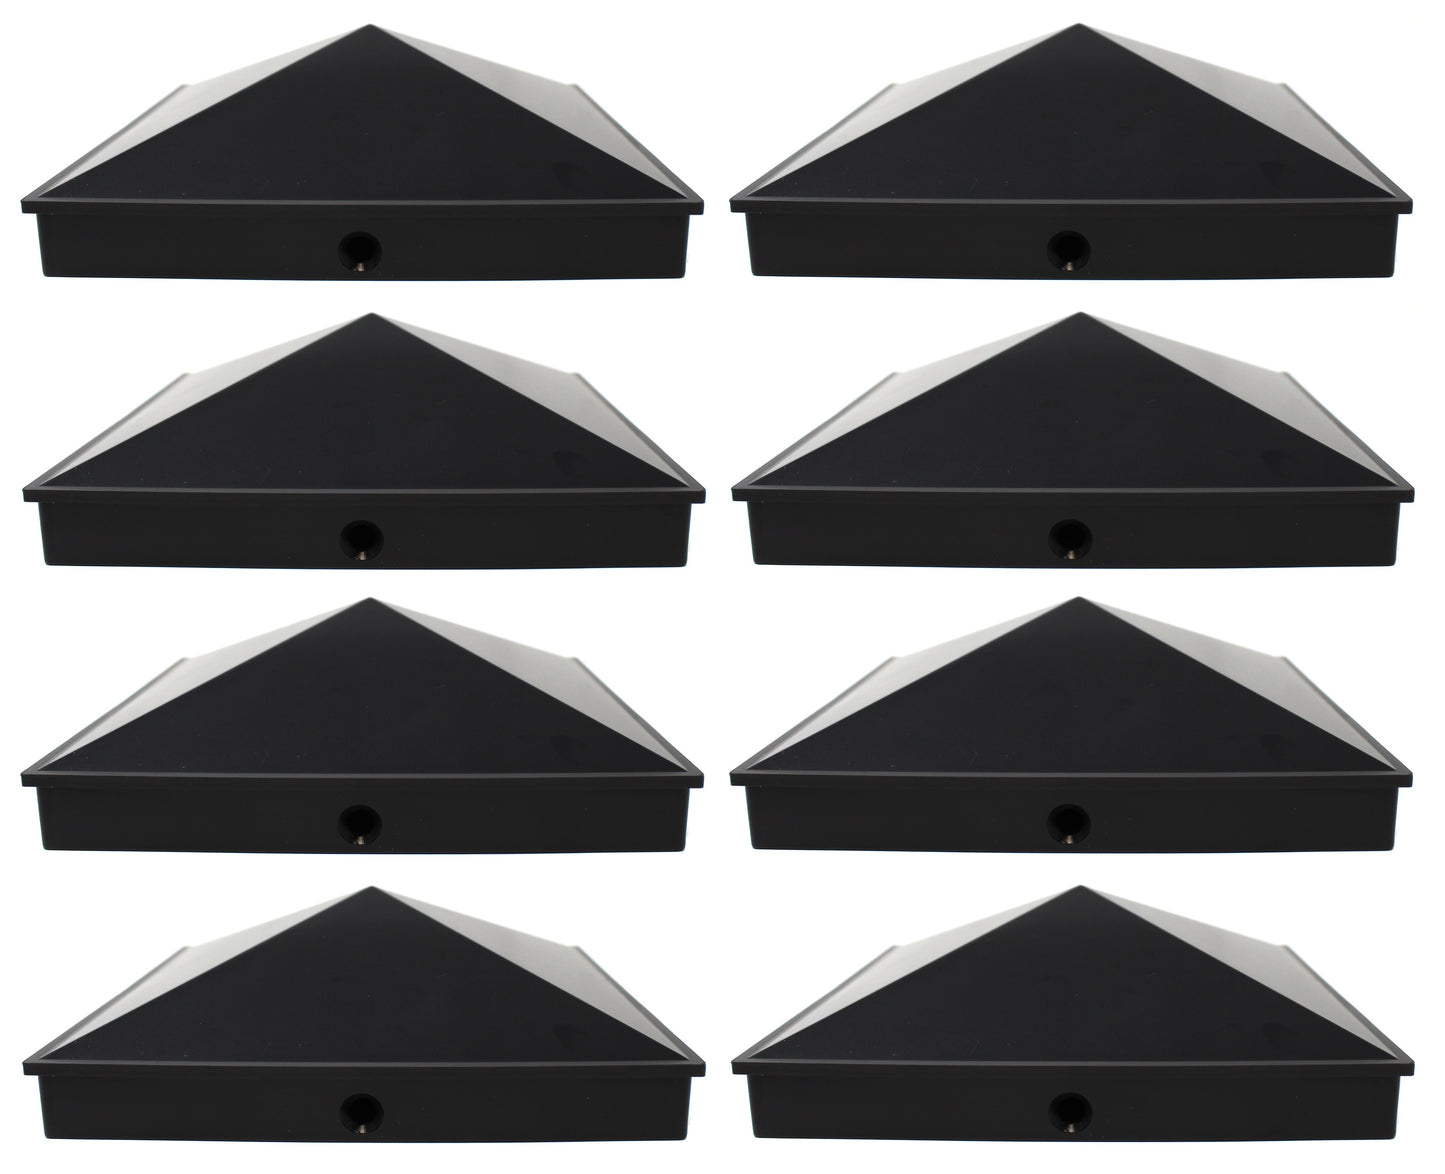 8x8 True Plastic Pyramid Vinyl Fence Post Cap w/ Pre-Drilled Hole Black or White for True 8"x8" Posts